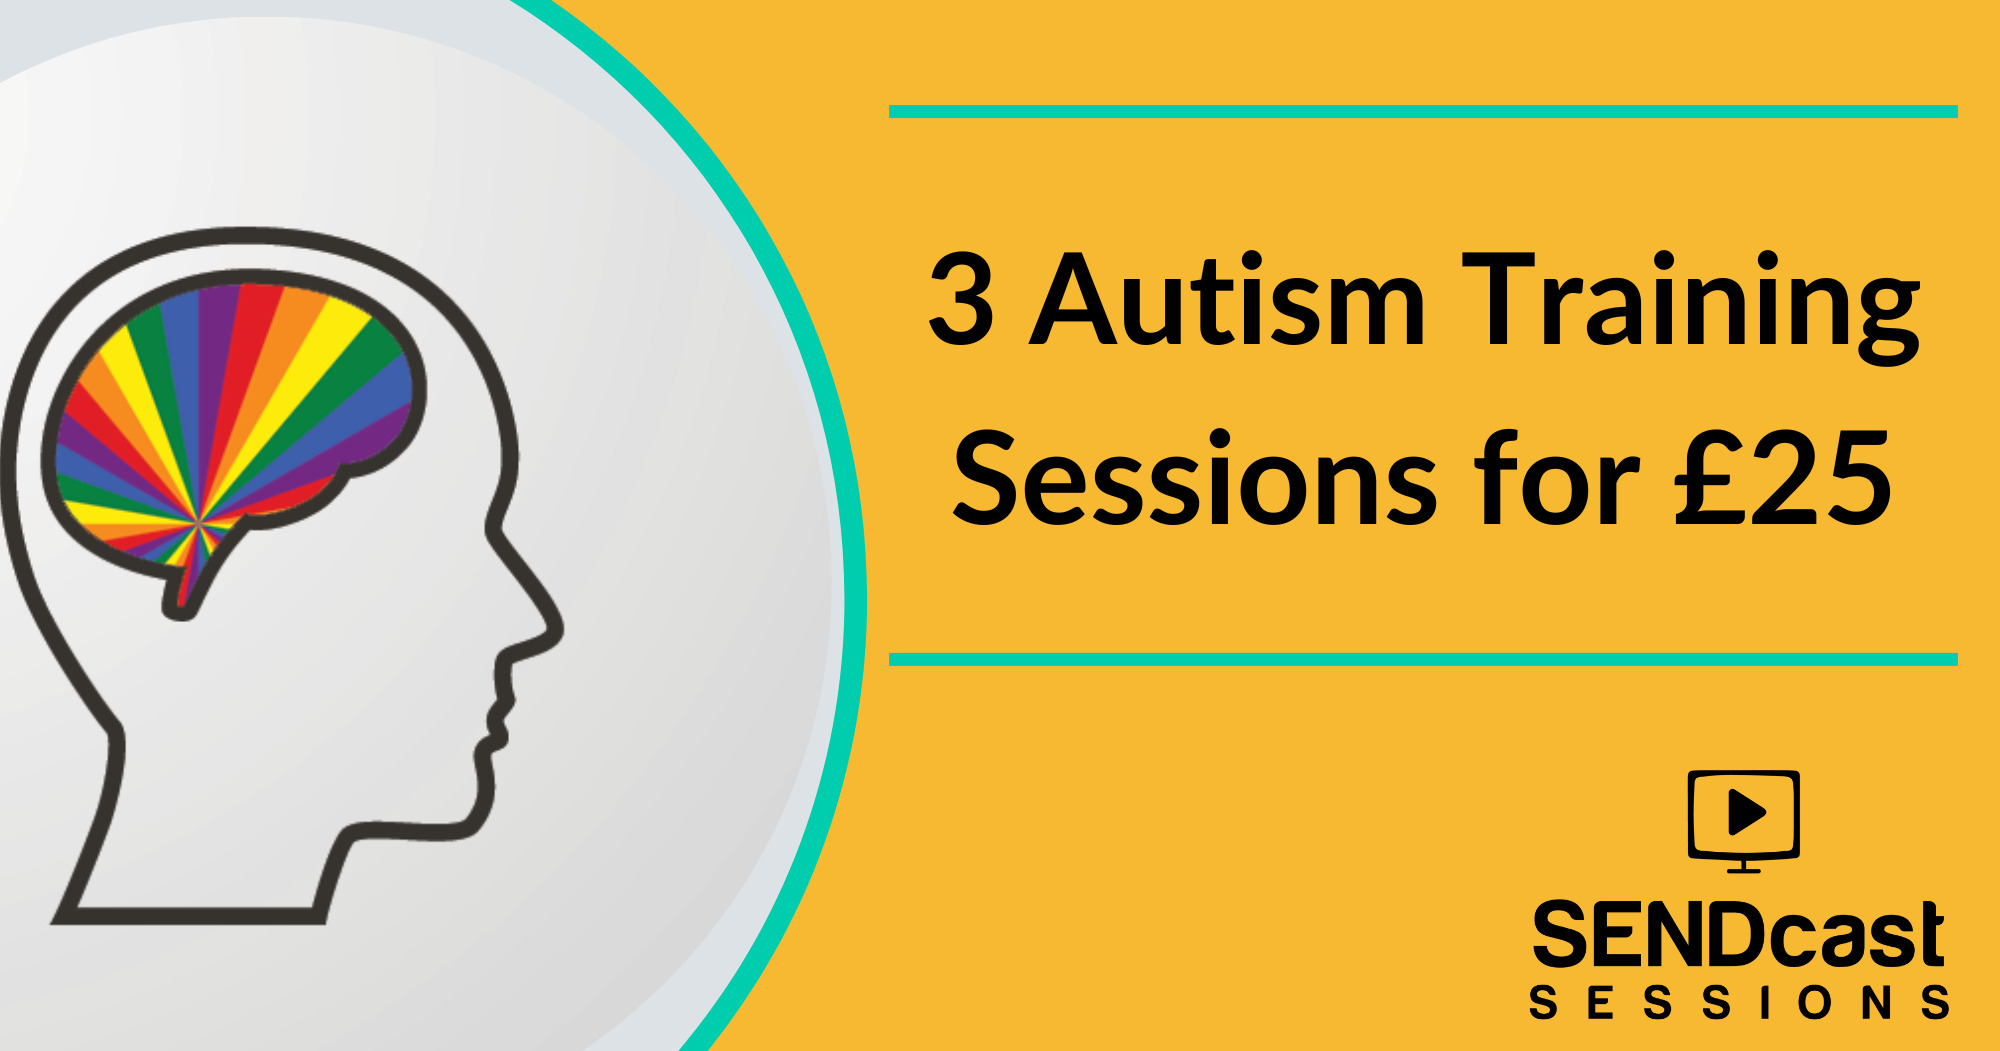 3 Autism Training Sessions from SENDcast Sessions